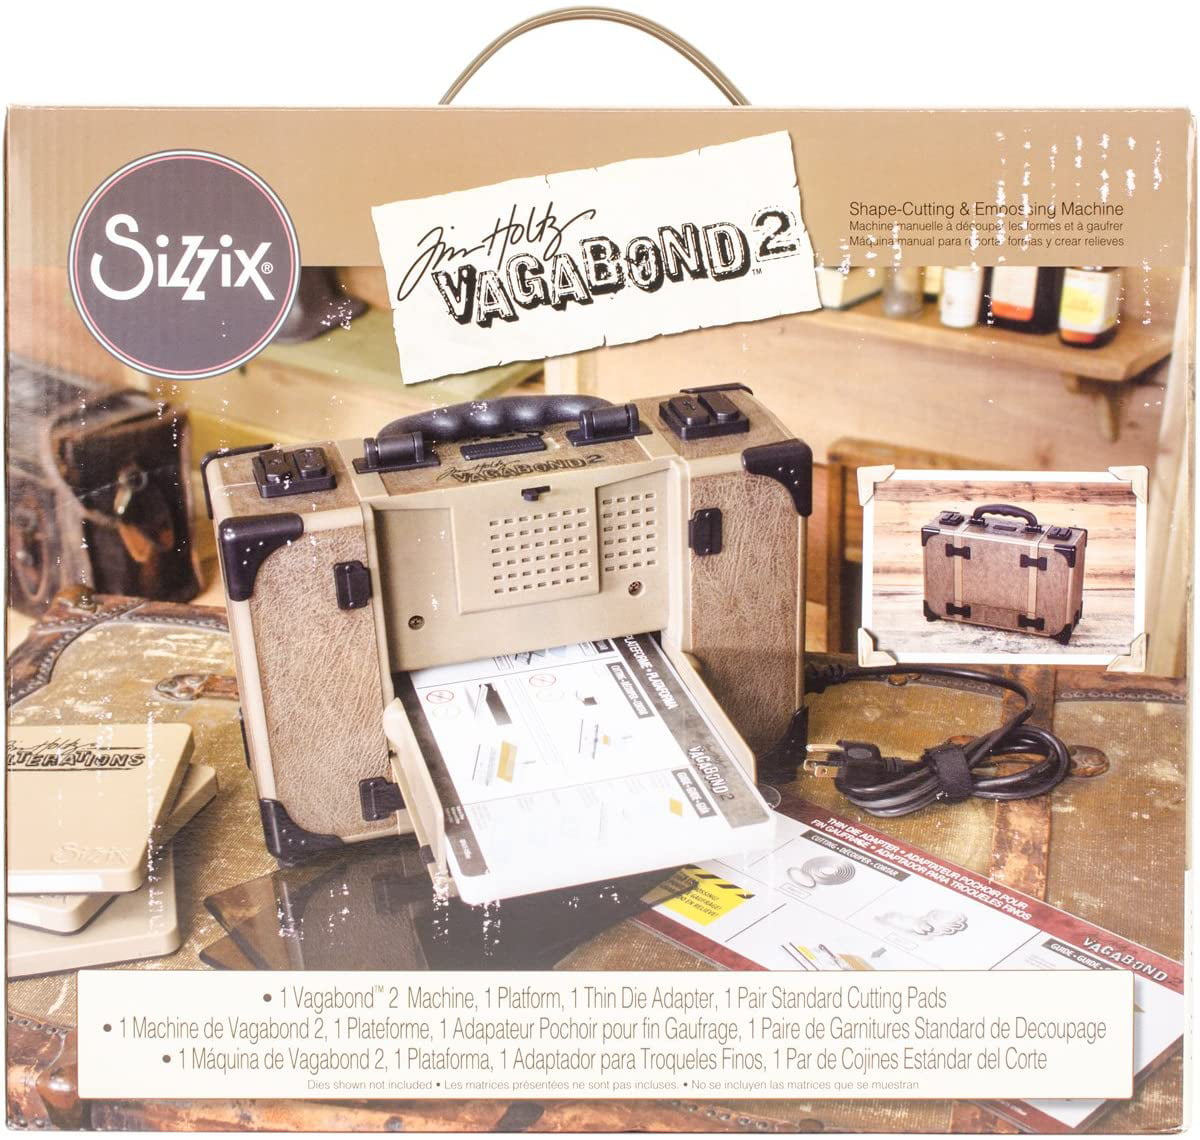 Sizzix Tim Holtz Vagabond 2 Electric Die Cutting Machine 660855, 6" (15.24cm) Opening, 6 in (15.24 cm), ELECTRIC - Make creating even easier….., By Visit the Sizzix - Walmart.com